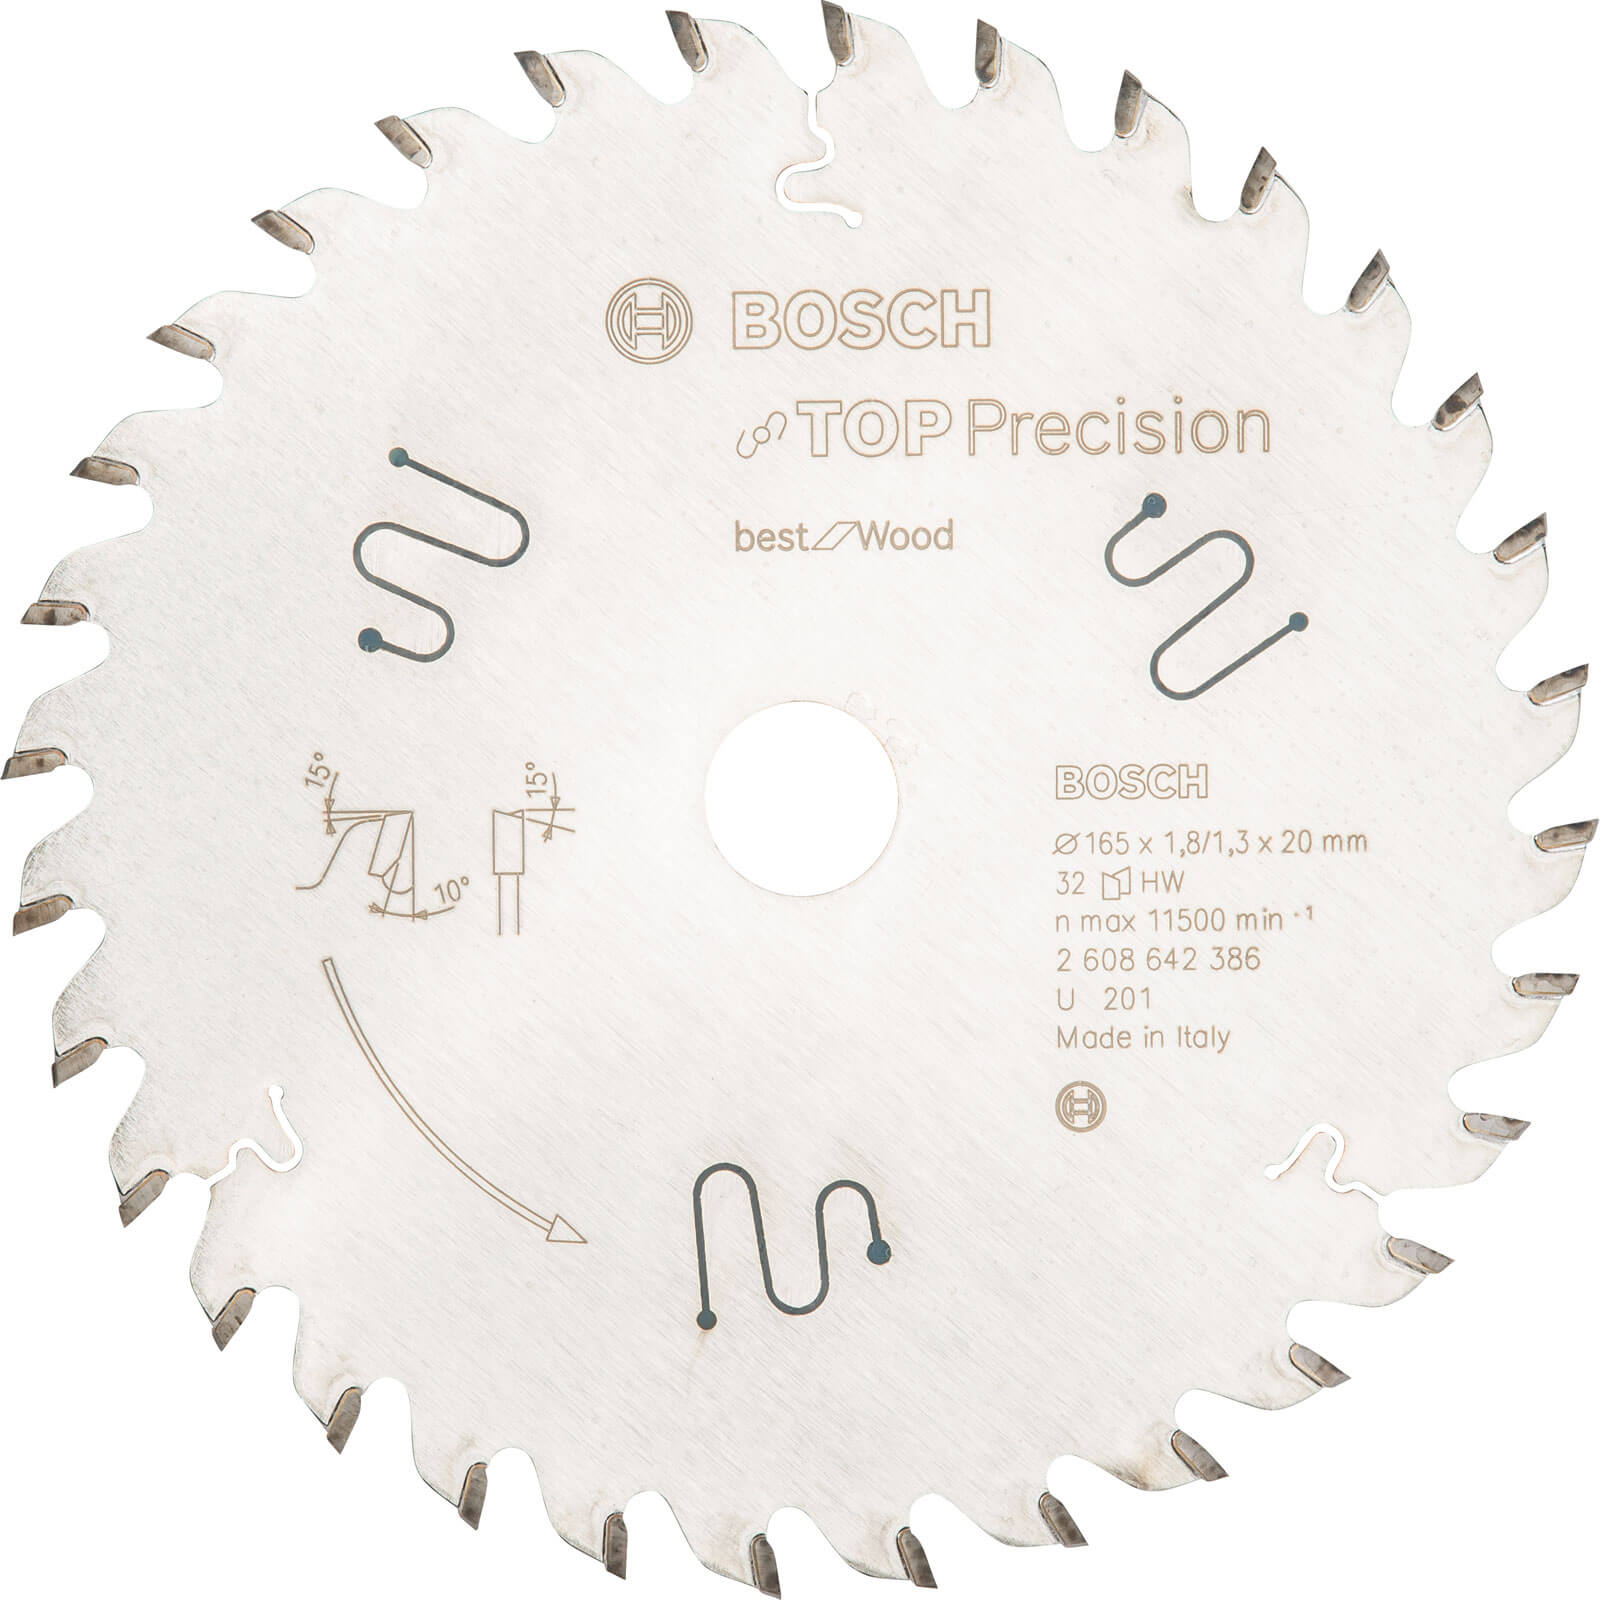 Photos - Power Tool Accessory Bosch Top Precision Wood Cutting Saw Blade 165mm 32T 20mm 